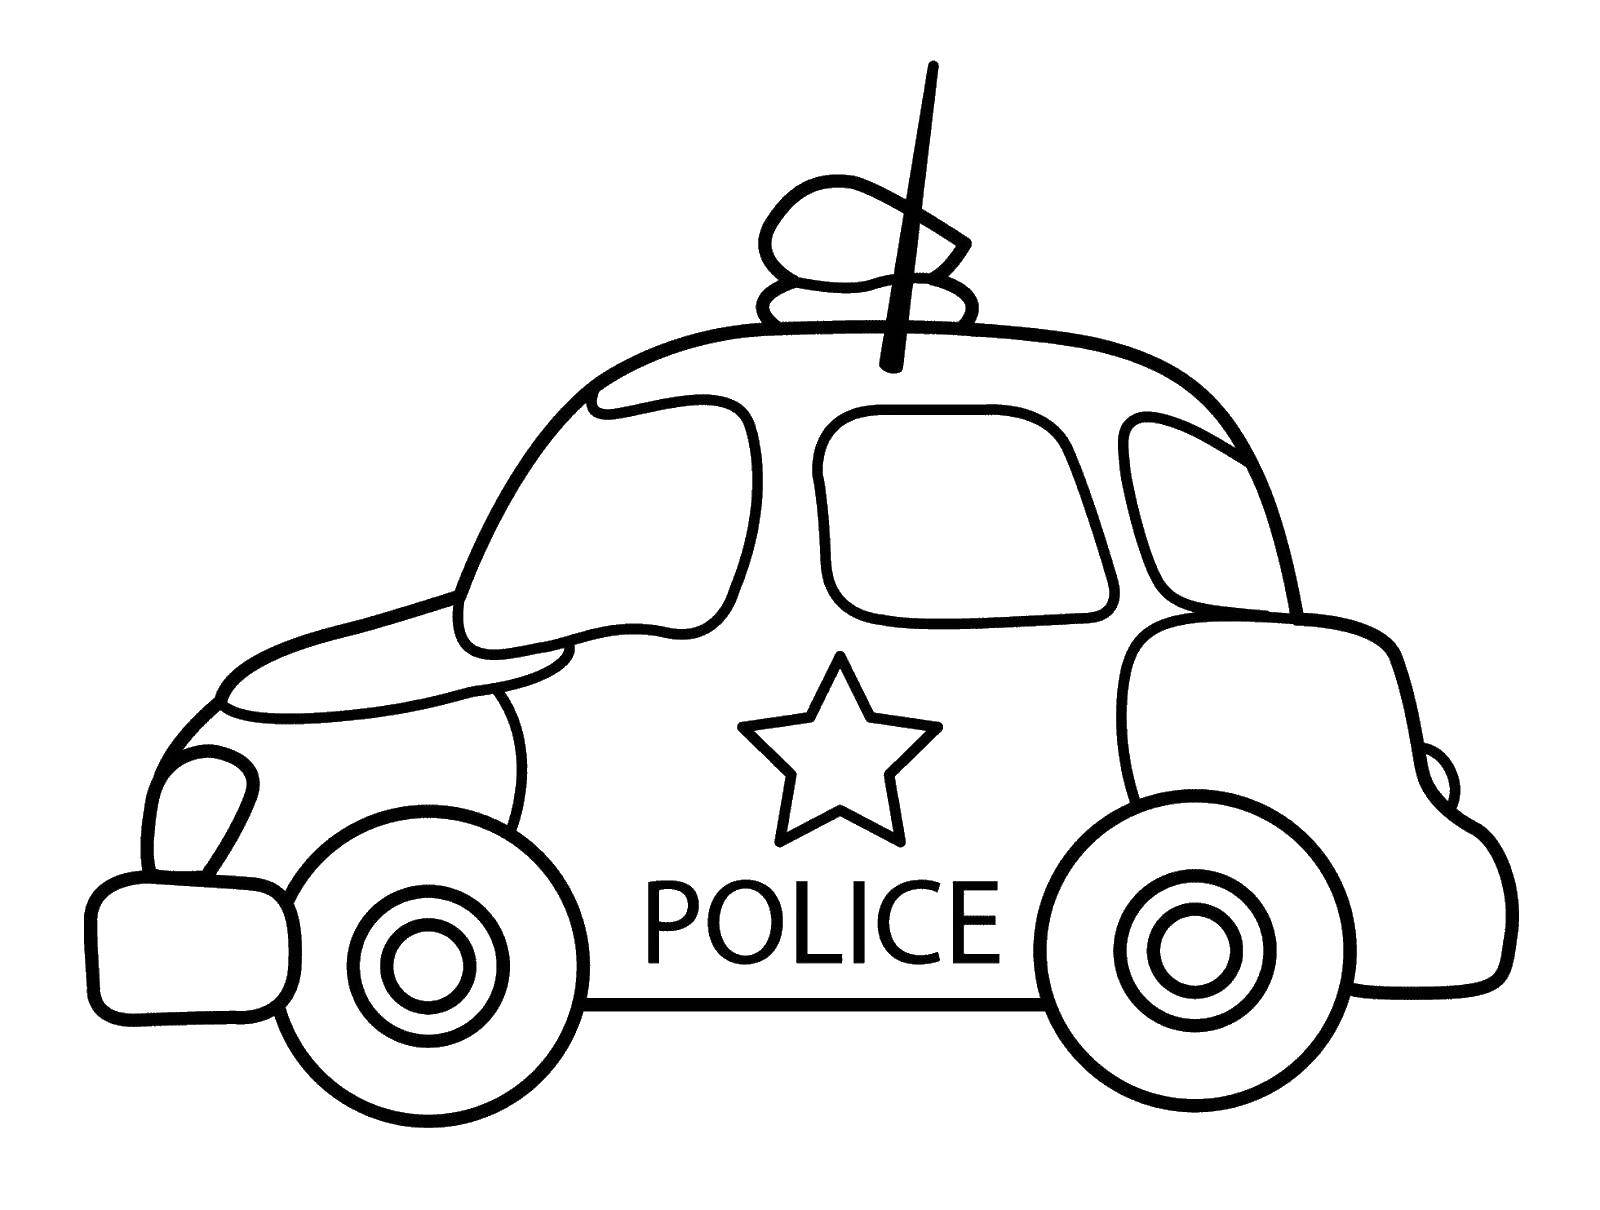 Coloring Police car. Category police. Tags:  Police, car, .